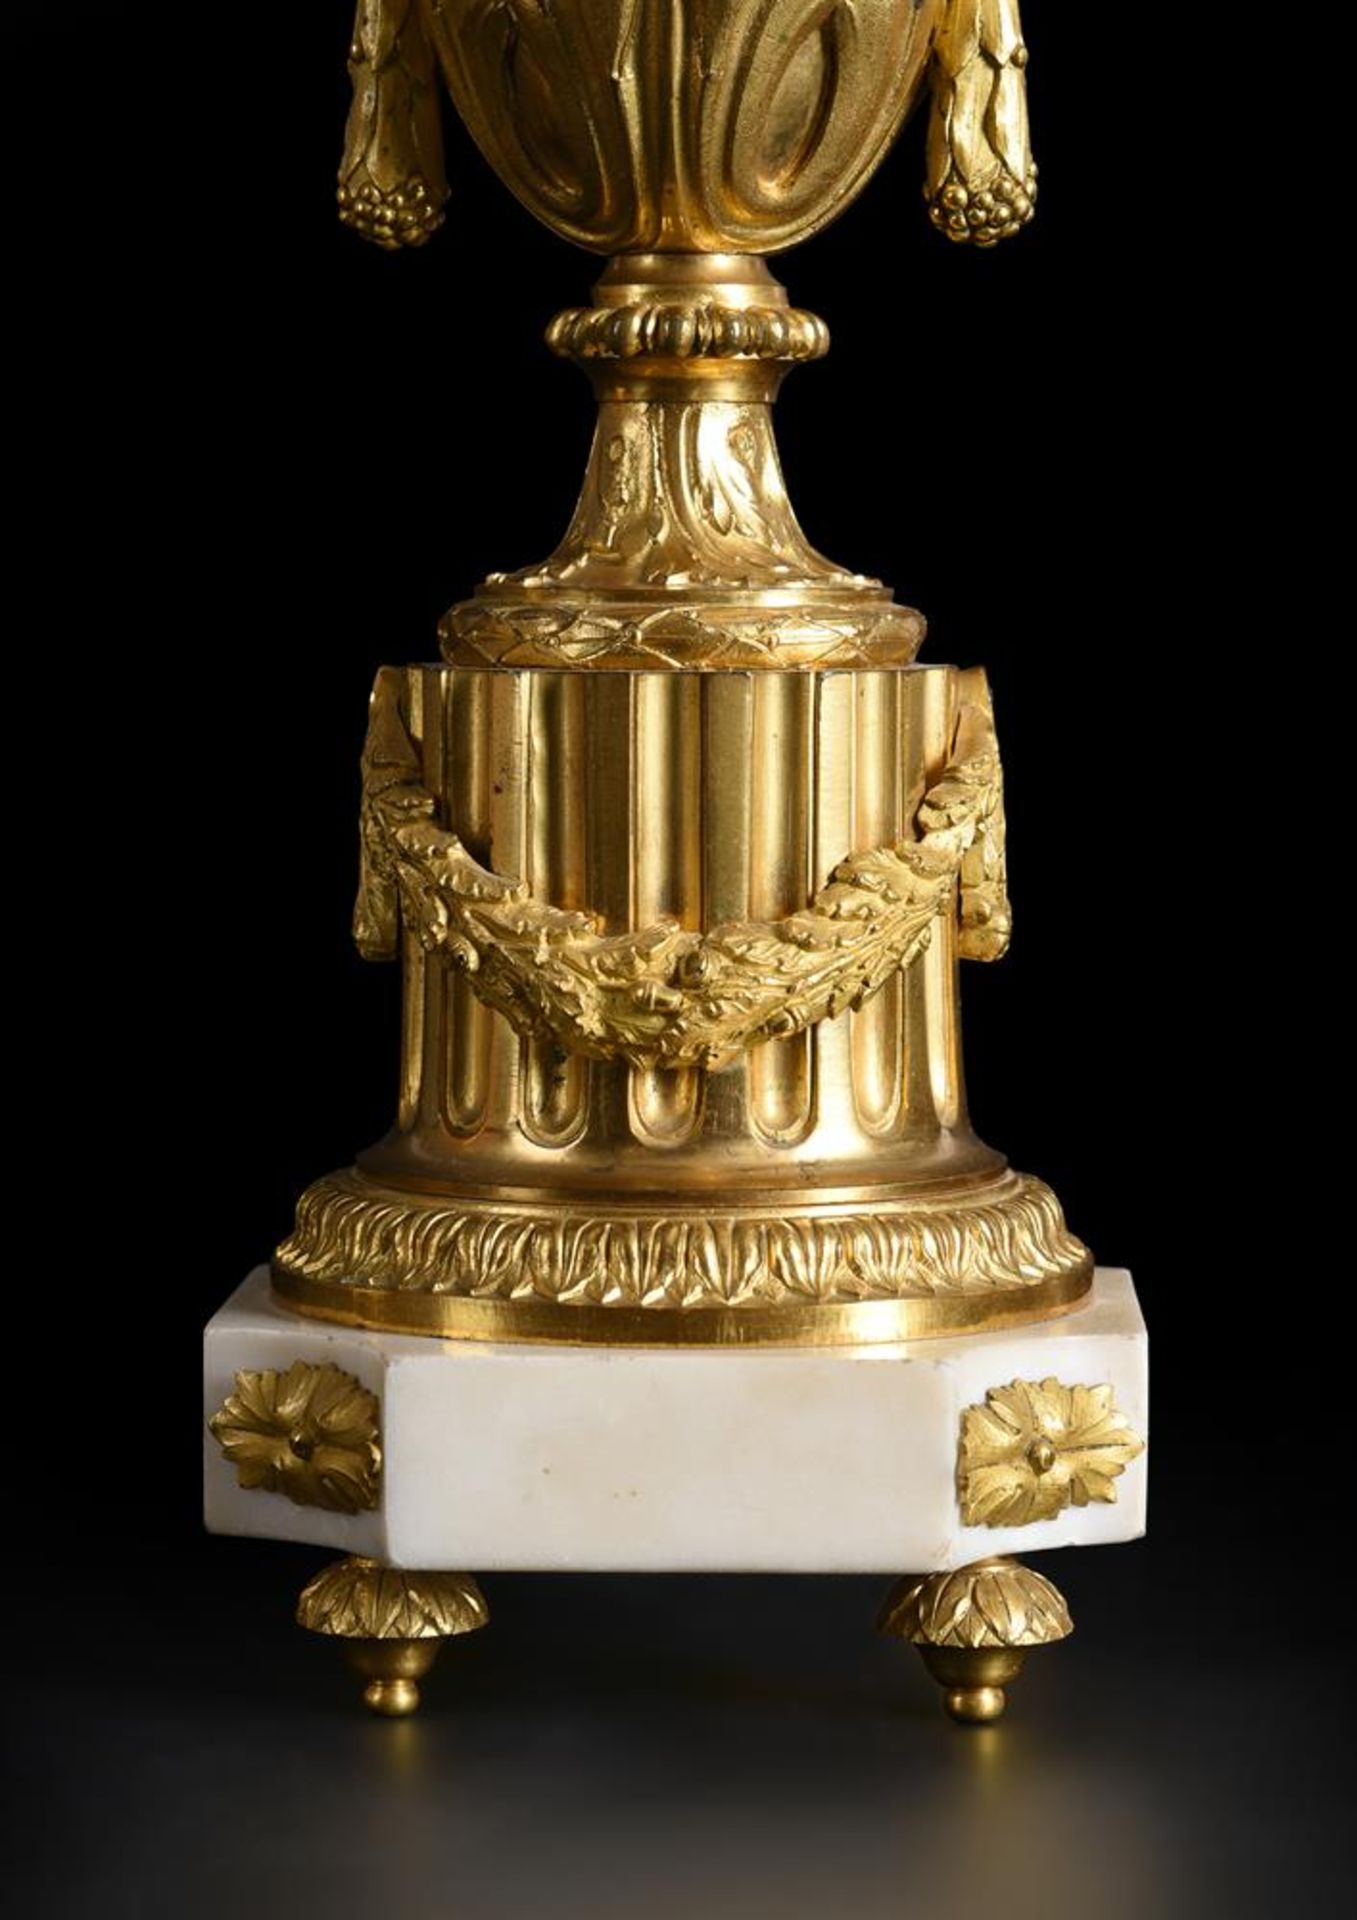 A PAIR OF GILT BRONZE AND MARBLE CLASSICAL URN TABLE LAMPS, FRENCH, 19TH CENTURY - Image 4 of 6